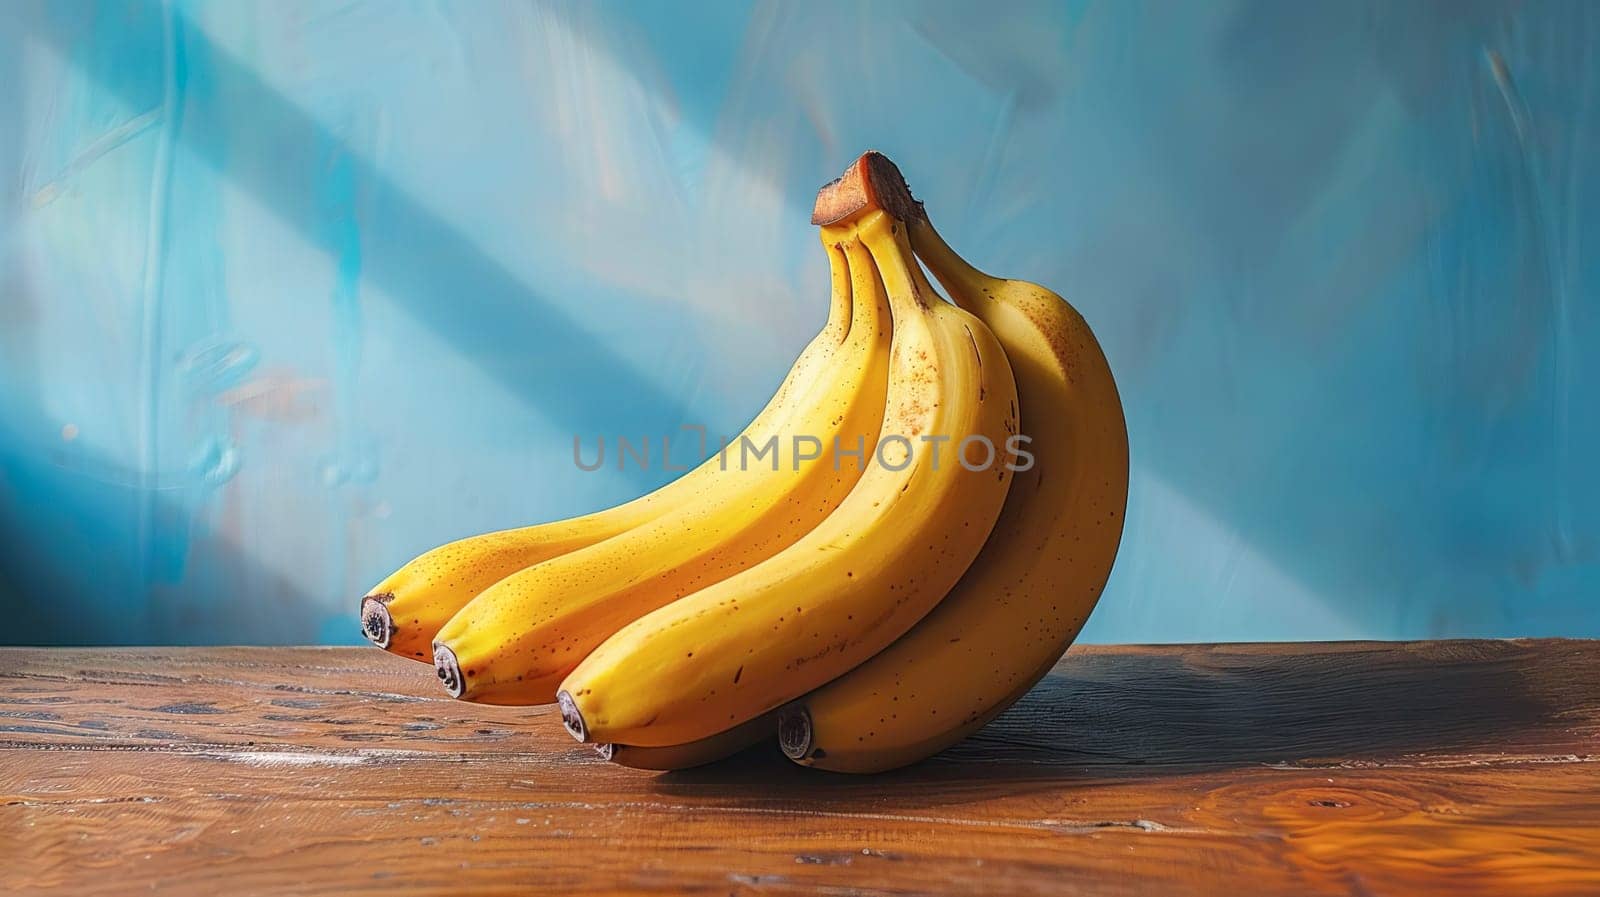 Ripe fresh bananas on a wooden surface.